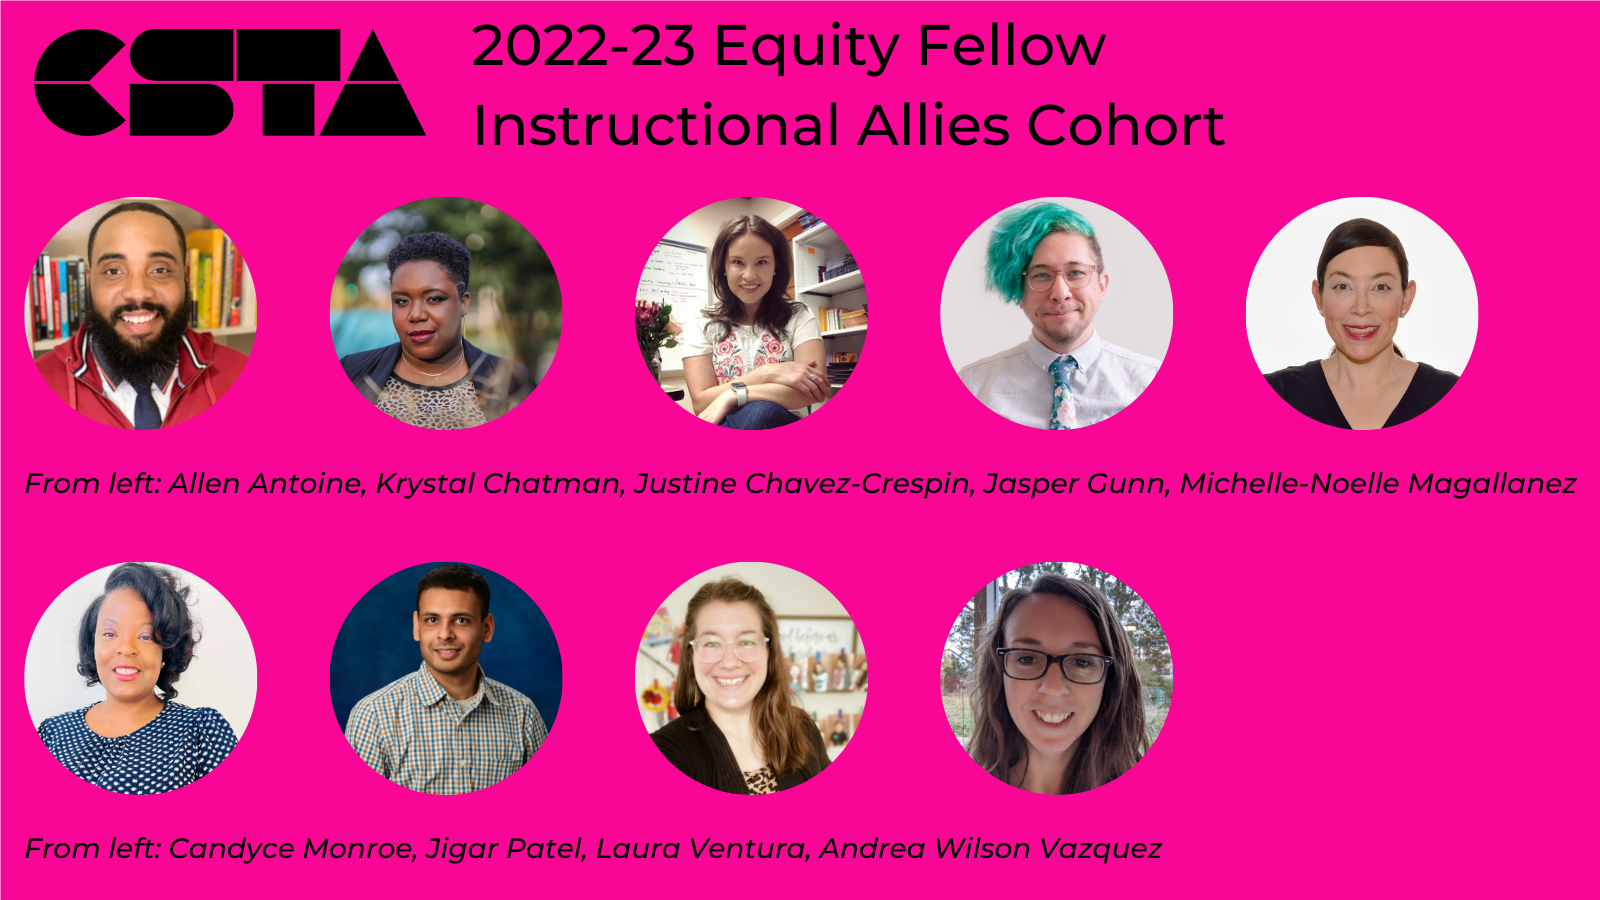 CSTA 2022-23 Equity fellow instructional allies cohort. 
Headshots of the cohort included.